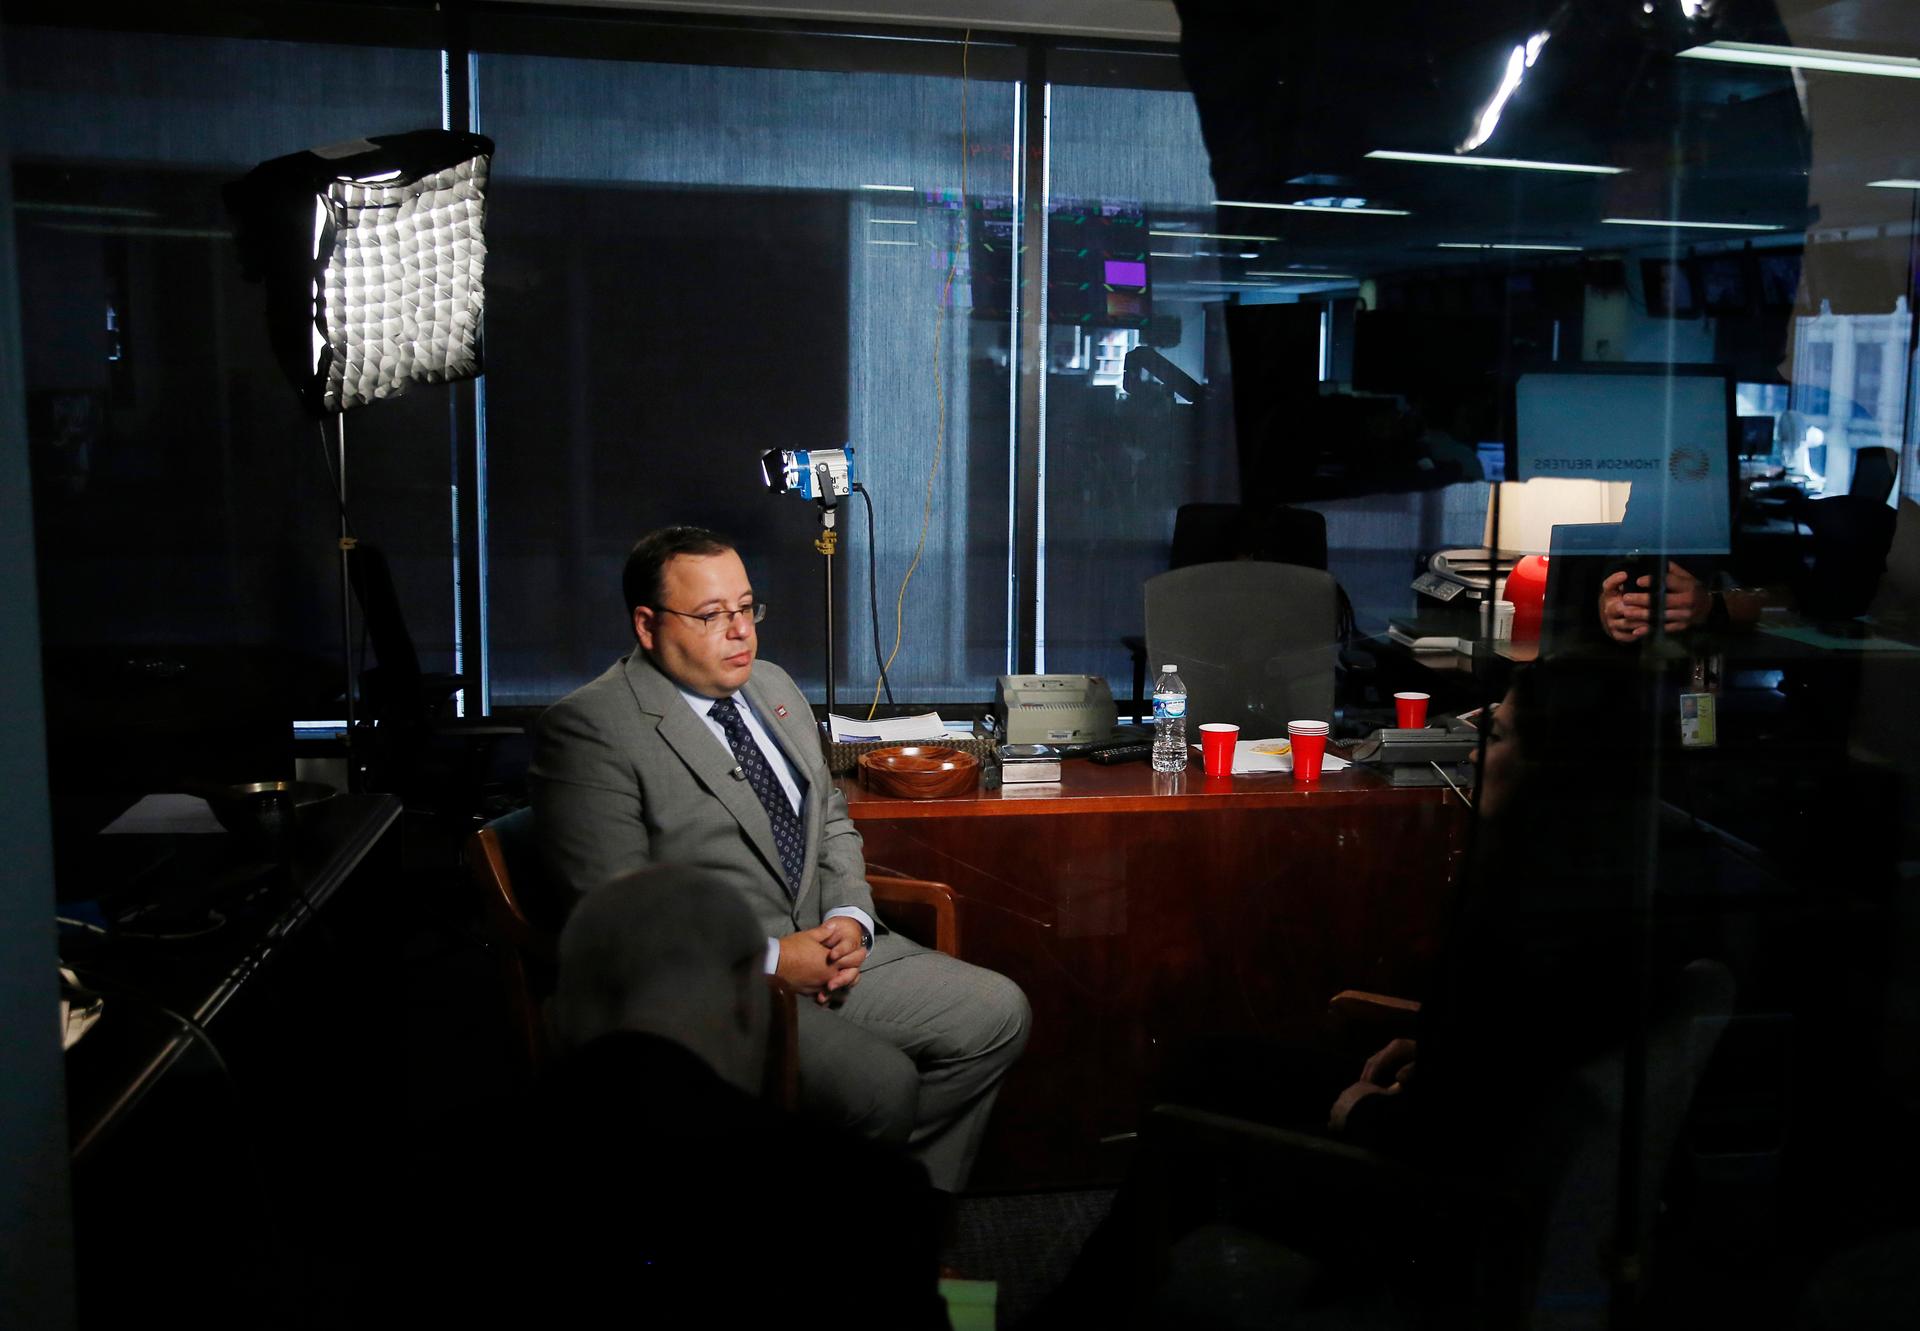 Ali Rezaian, brother of imprisoned Washington Post journalist Jason Rezaian, pauses as he talks about the recent announcement of a verdict in his brother's case by Iran's judiciary during a television interview with Reuters in Washington October 13, 2015.